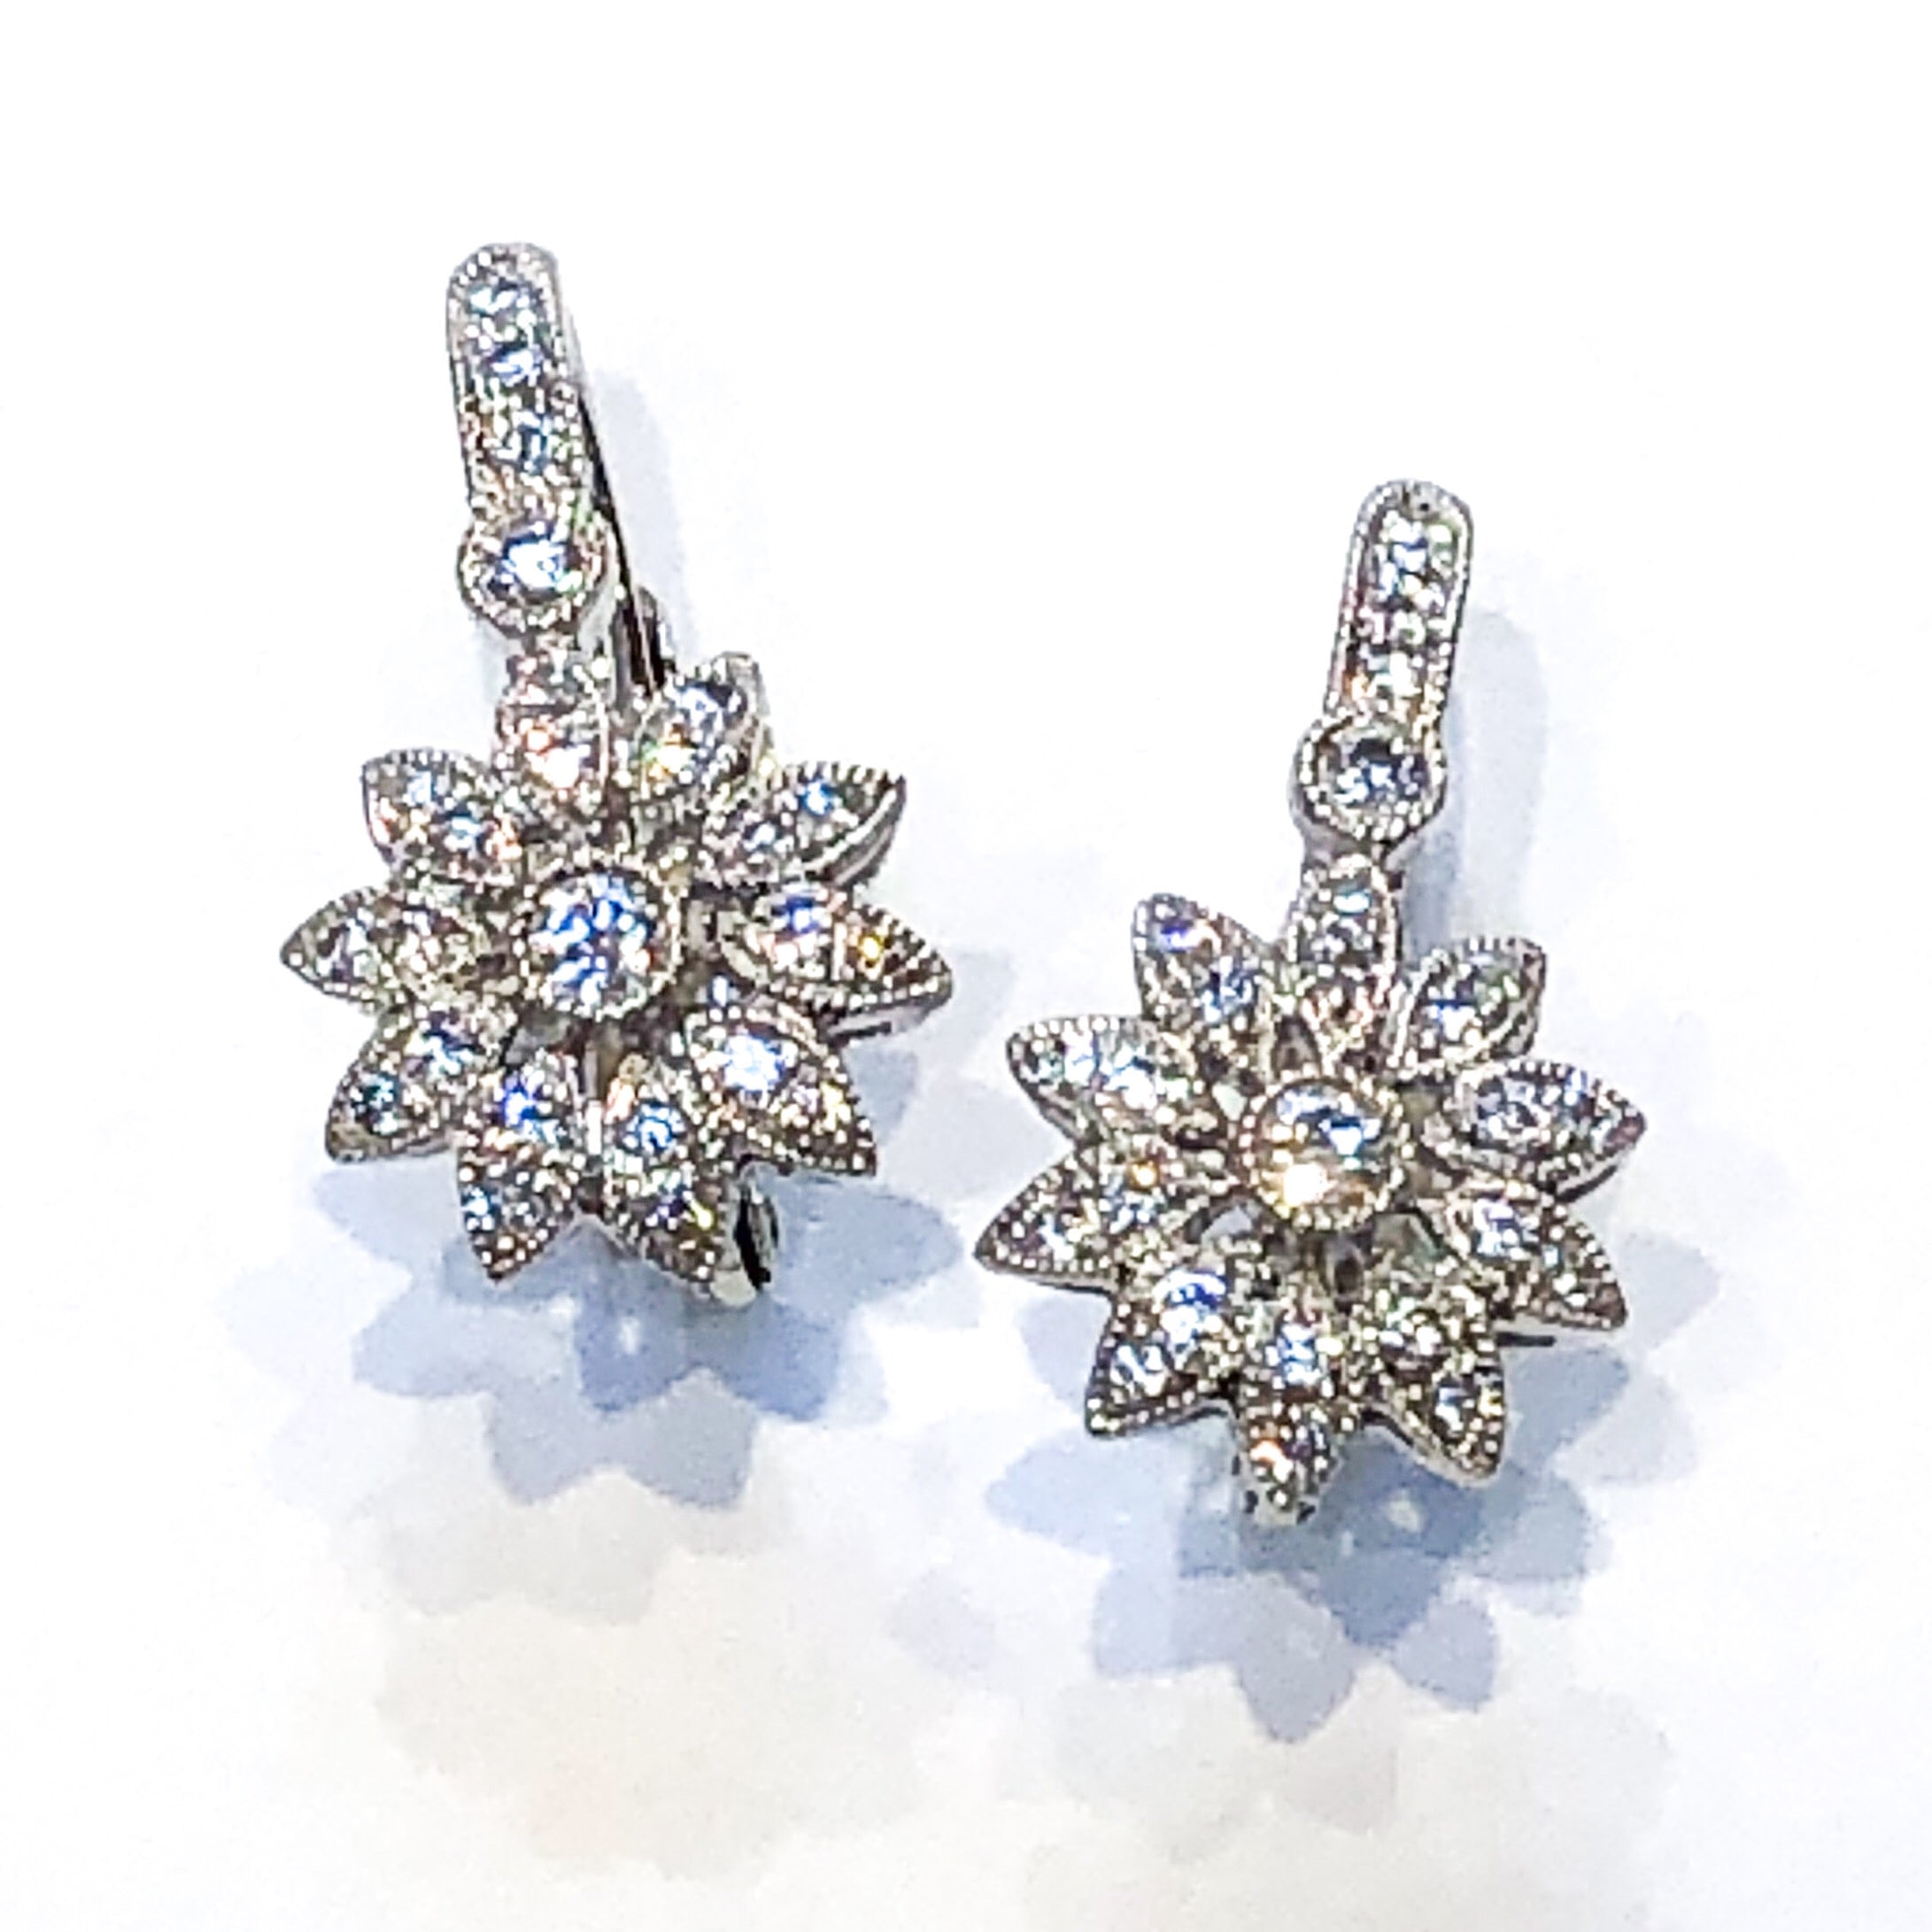 18kt White Gold and Diamond Pave Earrings